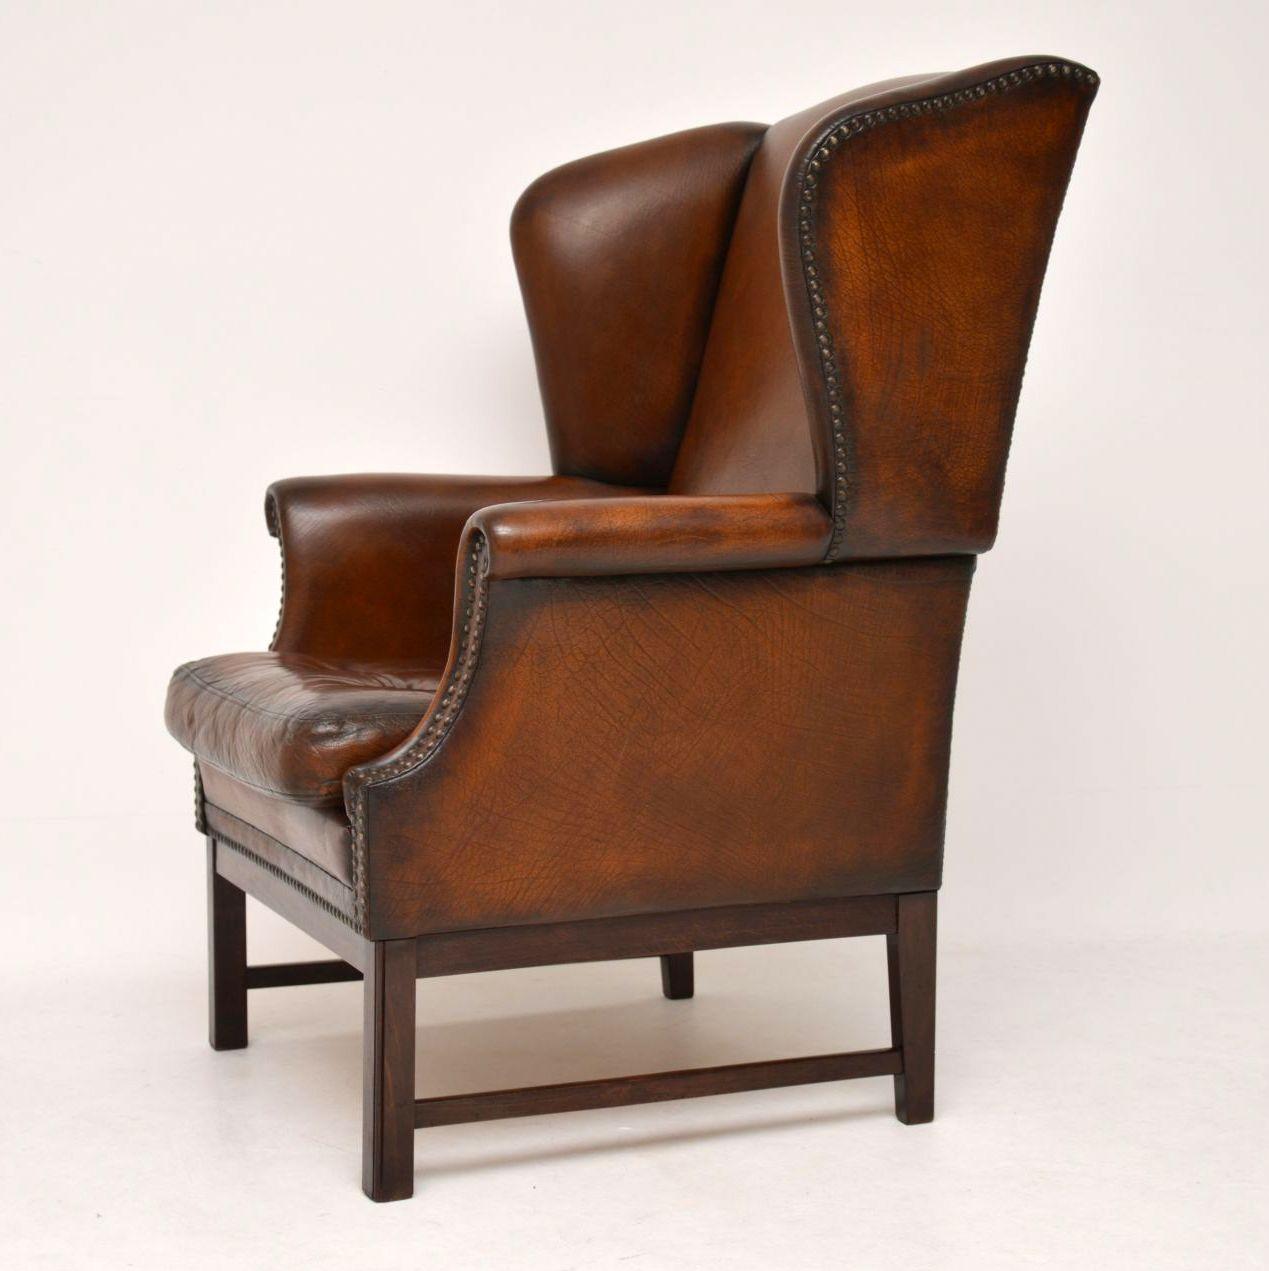 Very comfortable antique leather wing armchair in good original condition and dating from around the 1930s-1950s period. The leather has been professionally polished and color enhanced, so it has a lot of character. The seat is buttoned and the